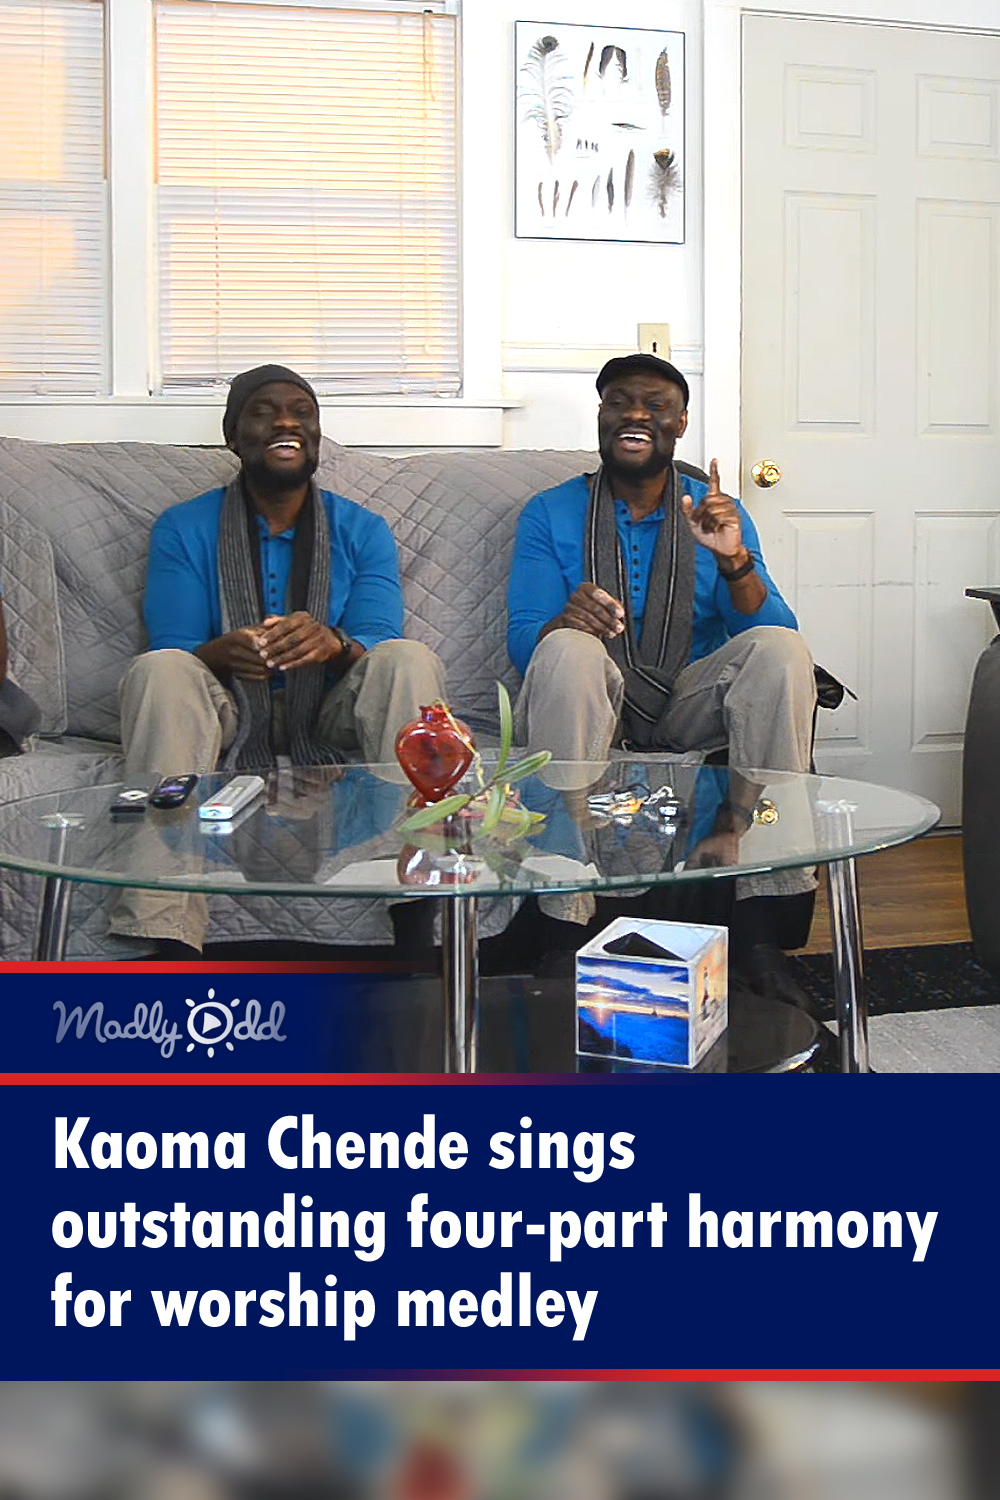 Kaoma Chende sings outstanding four-part harmony for worship medley